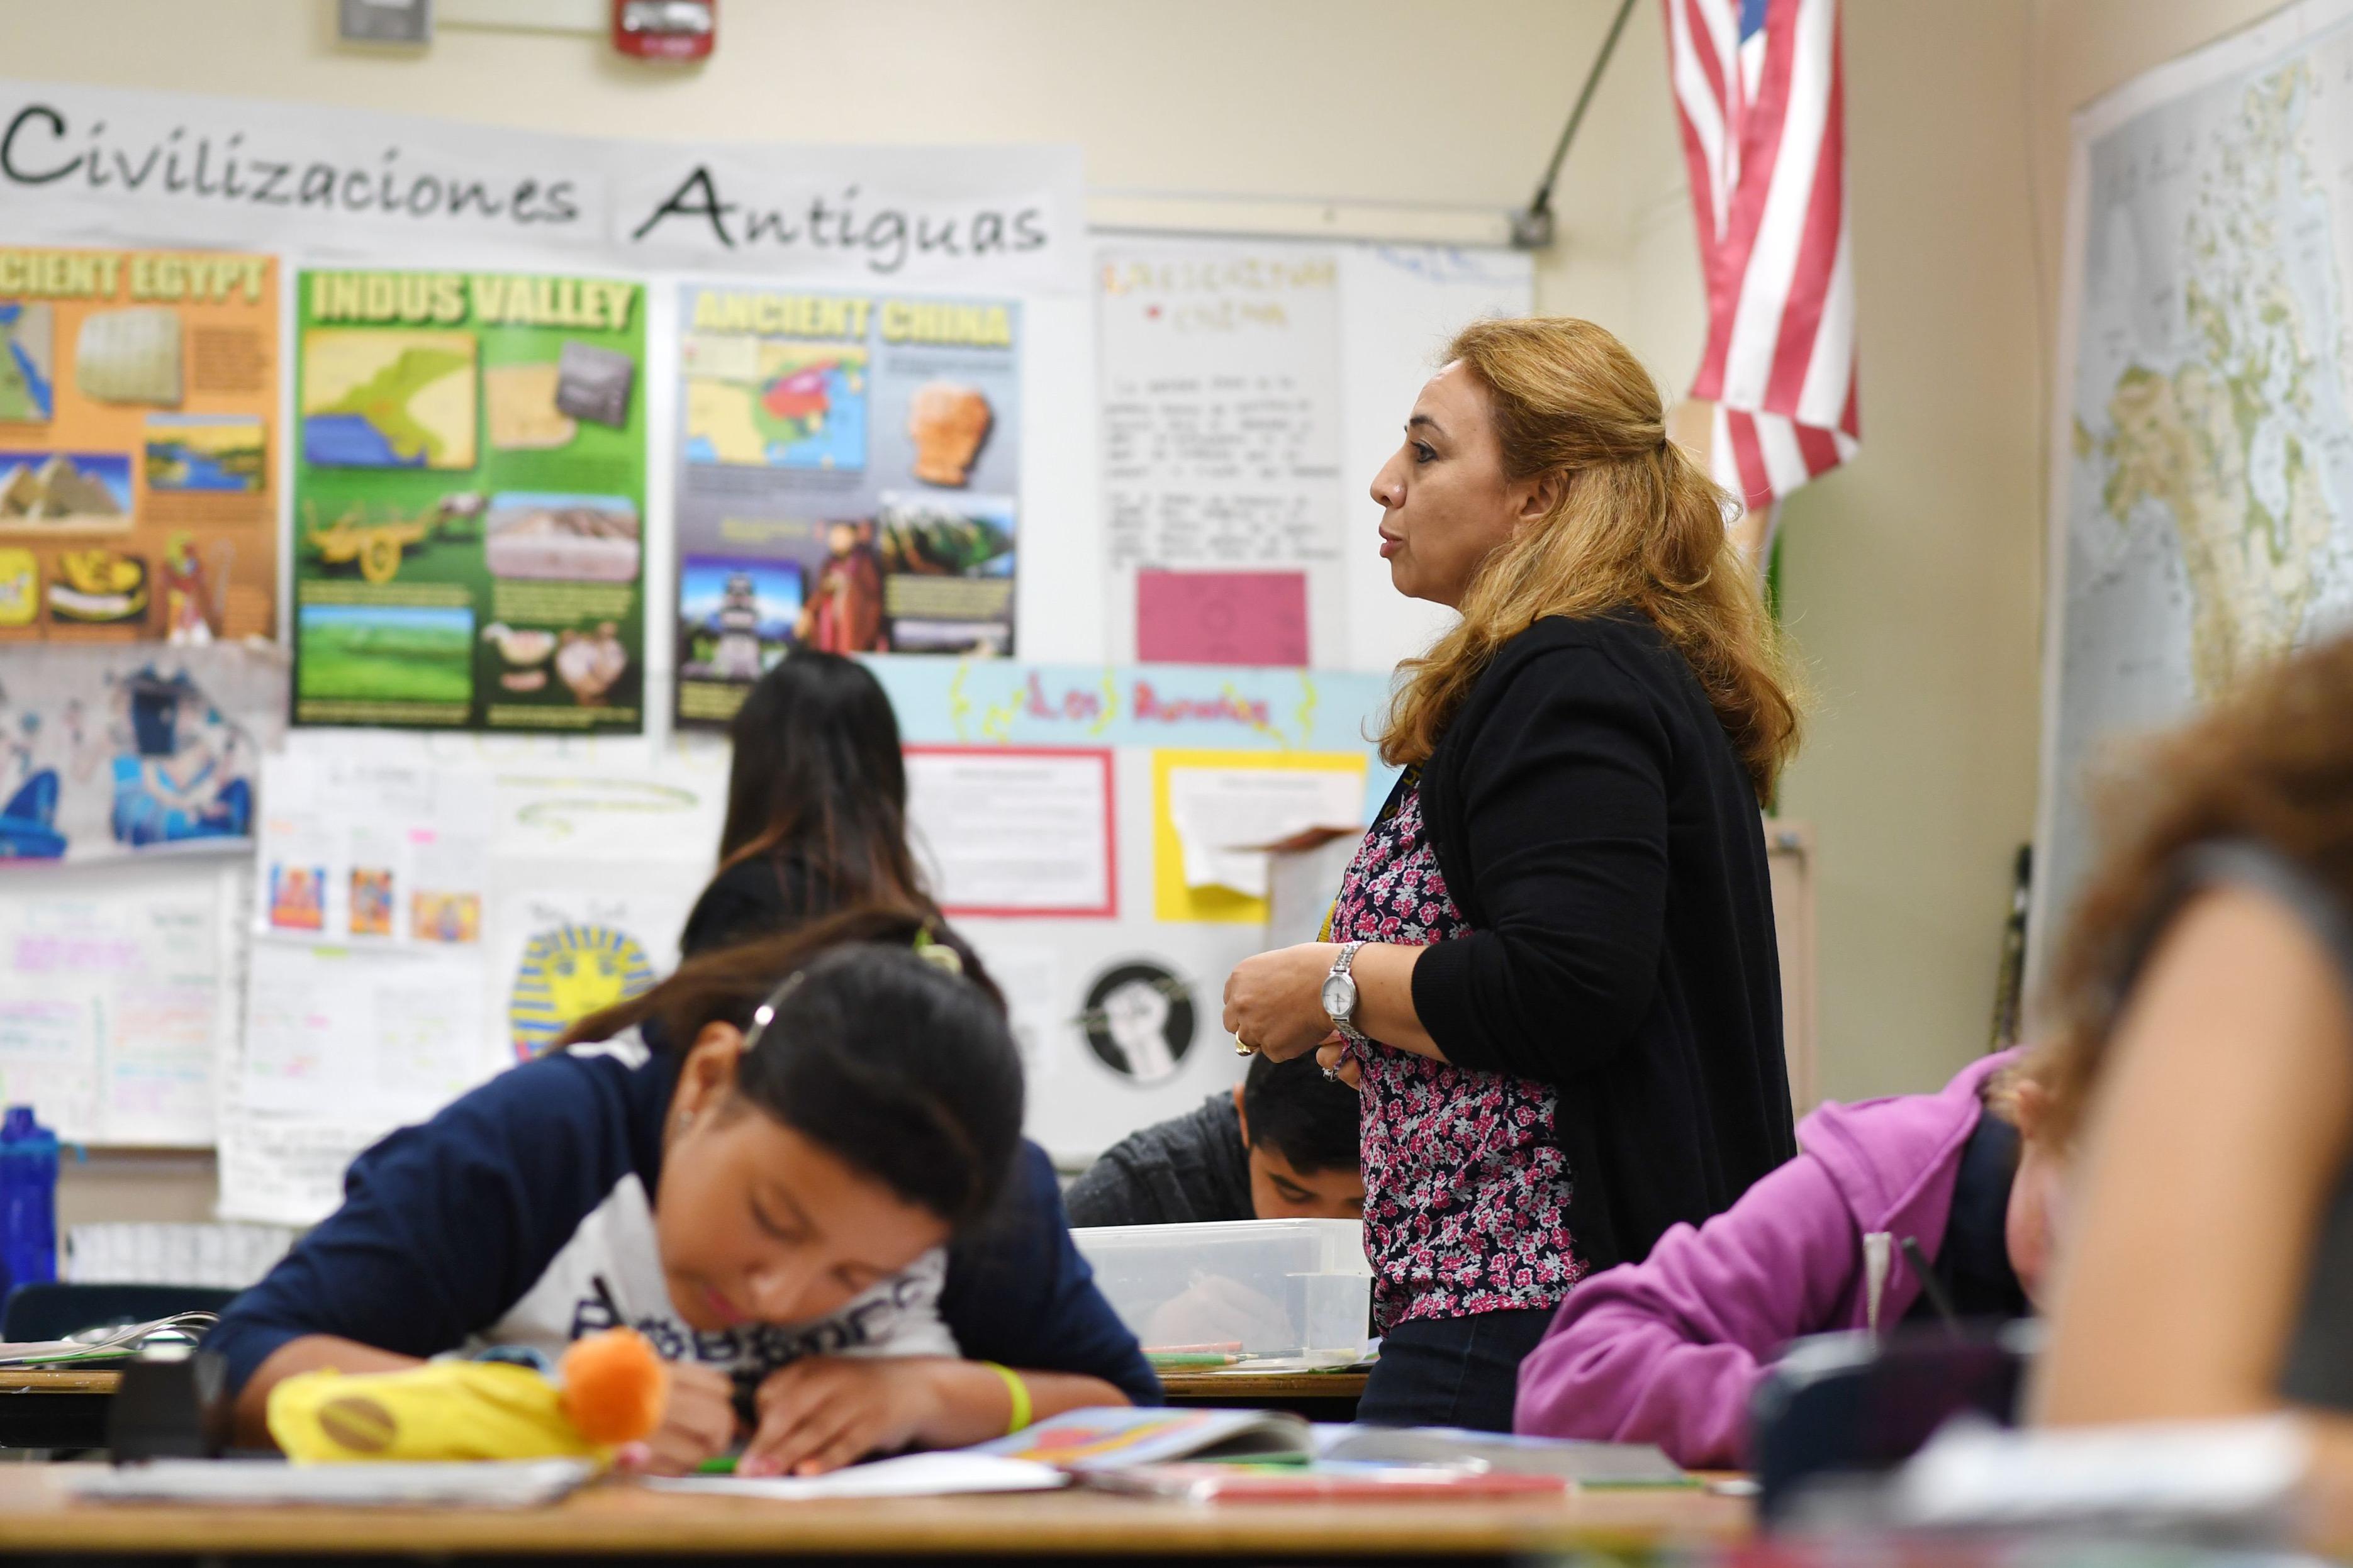 California Behind Several States, Including Texas, on Bilingual Education